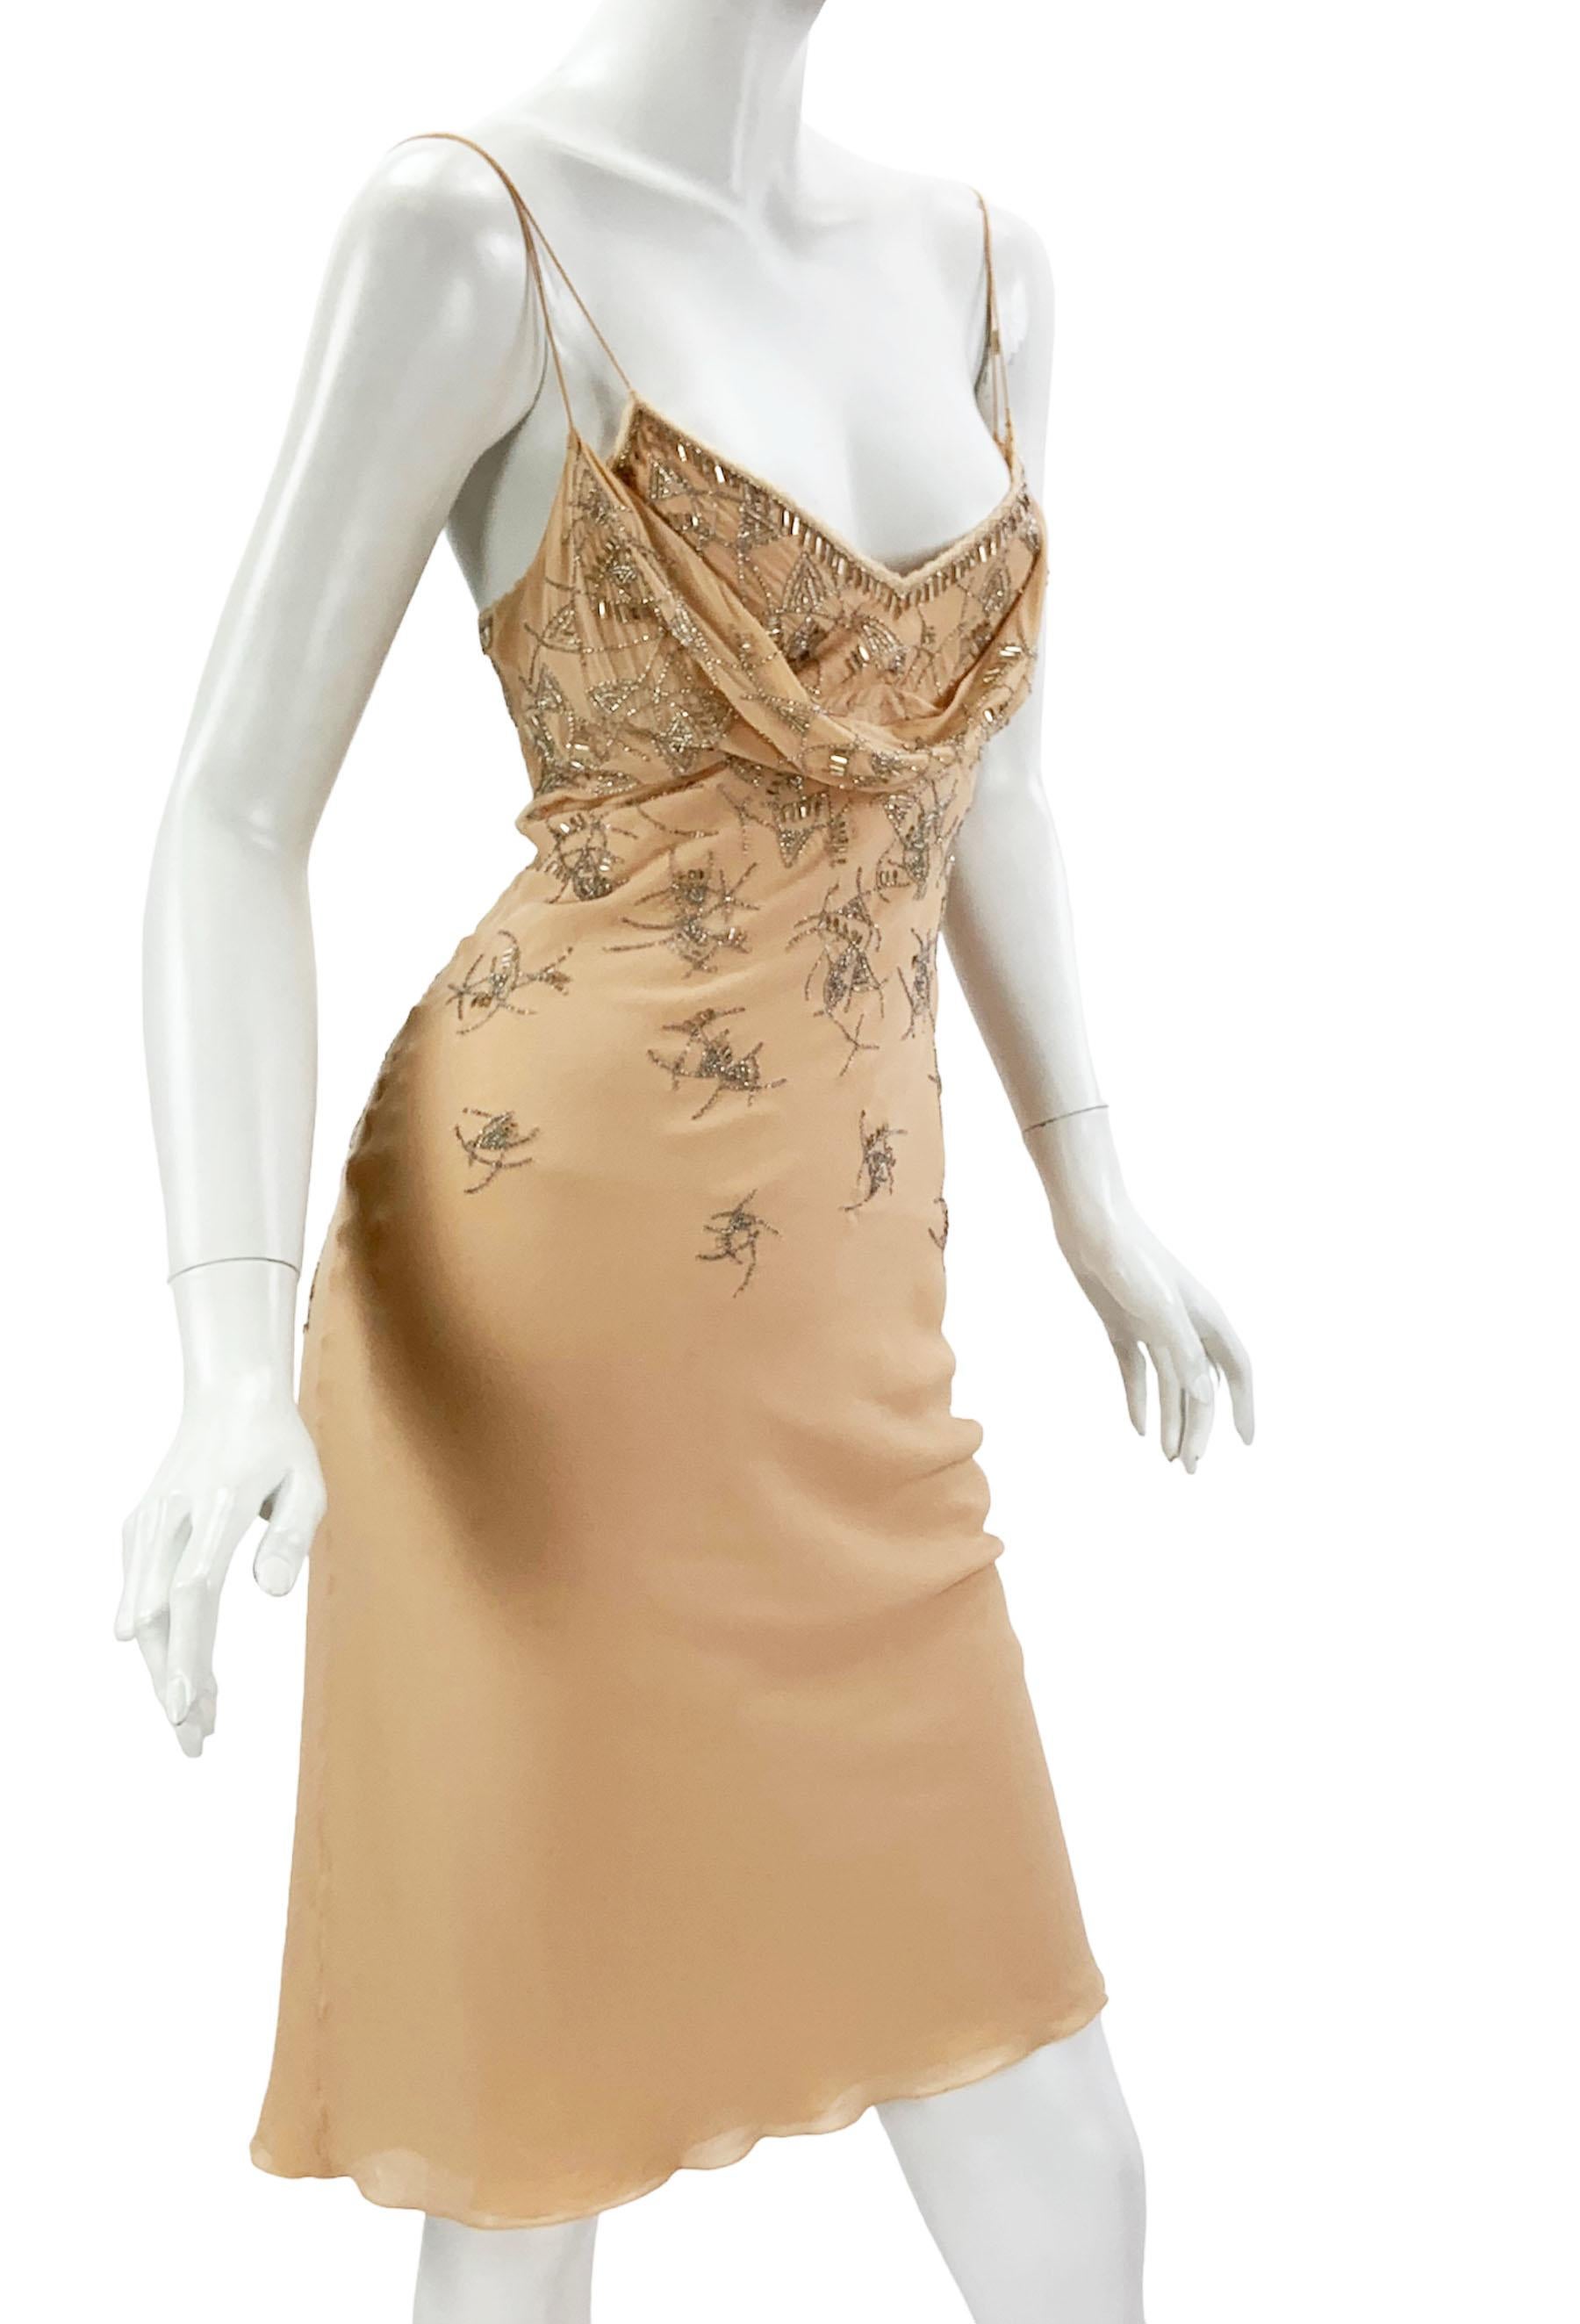 Vintage Christian Dior by John Galliano Silk Embellished Dress
2005 Collection
French size 42 ( US 4 )
Silver tone beads over the beige silk, Signature Galliano little buttons closure, Spaghetti straps, Cowl neckline, Fully lined, Bias cut.
Size